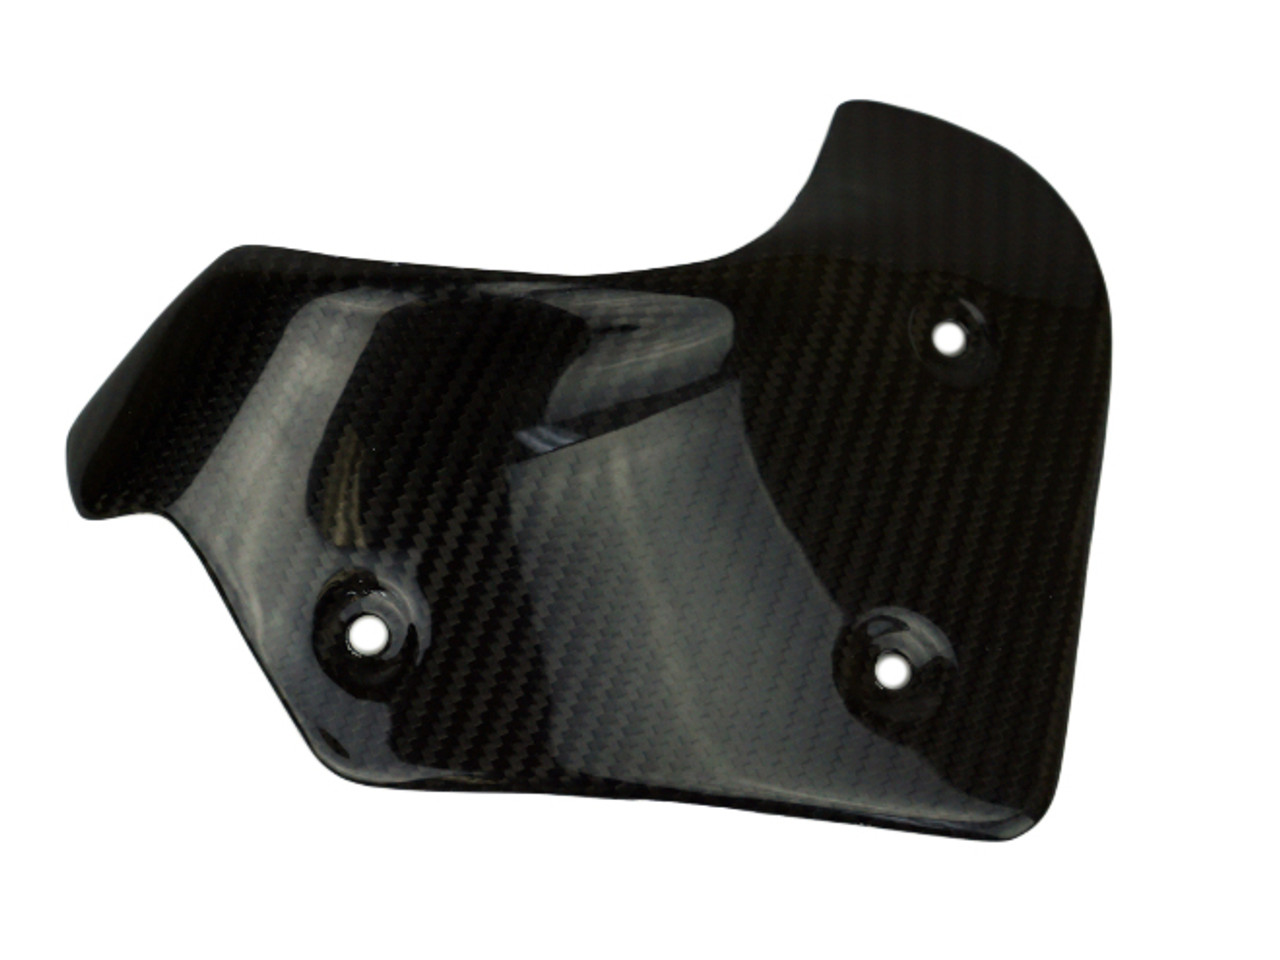 Termignoni Exhaust Shield (with heat foil) in Glossy Twill Weave Carbon Fiber for Ducati XDiavel